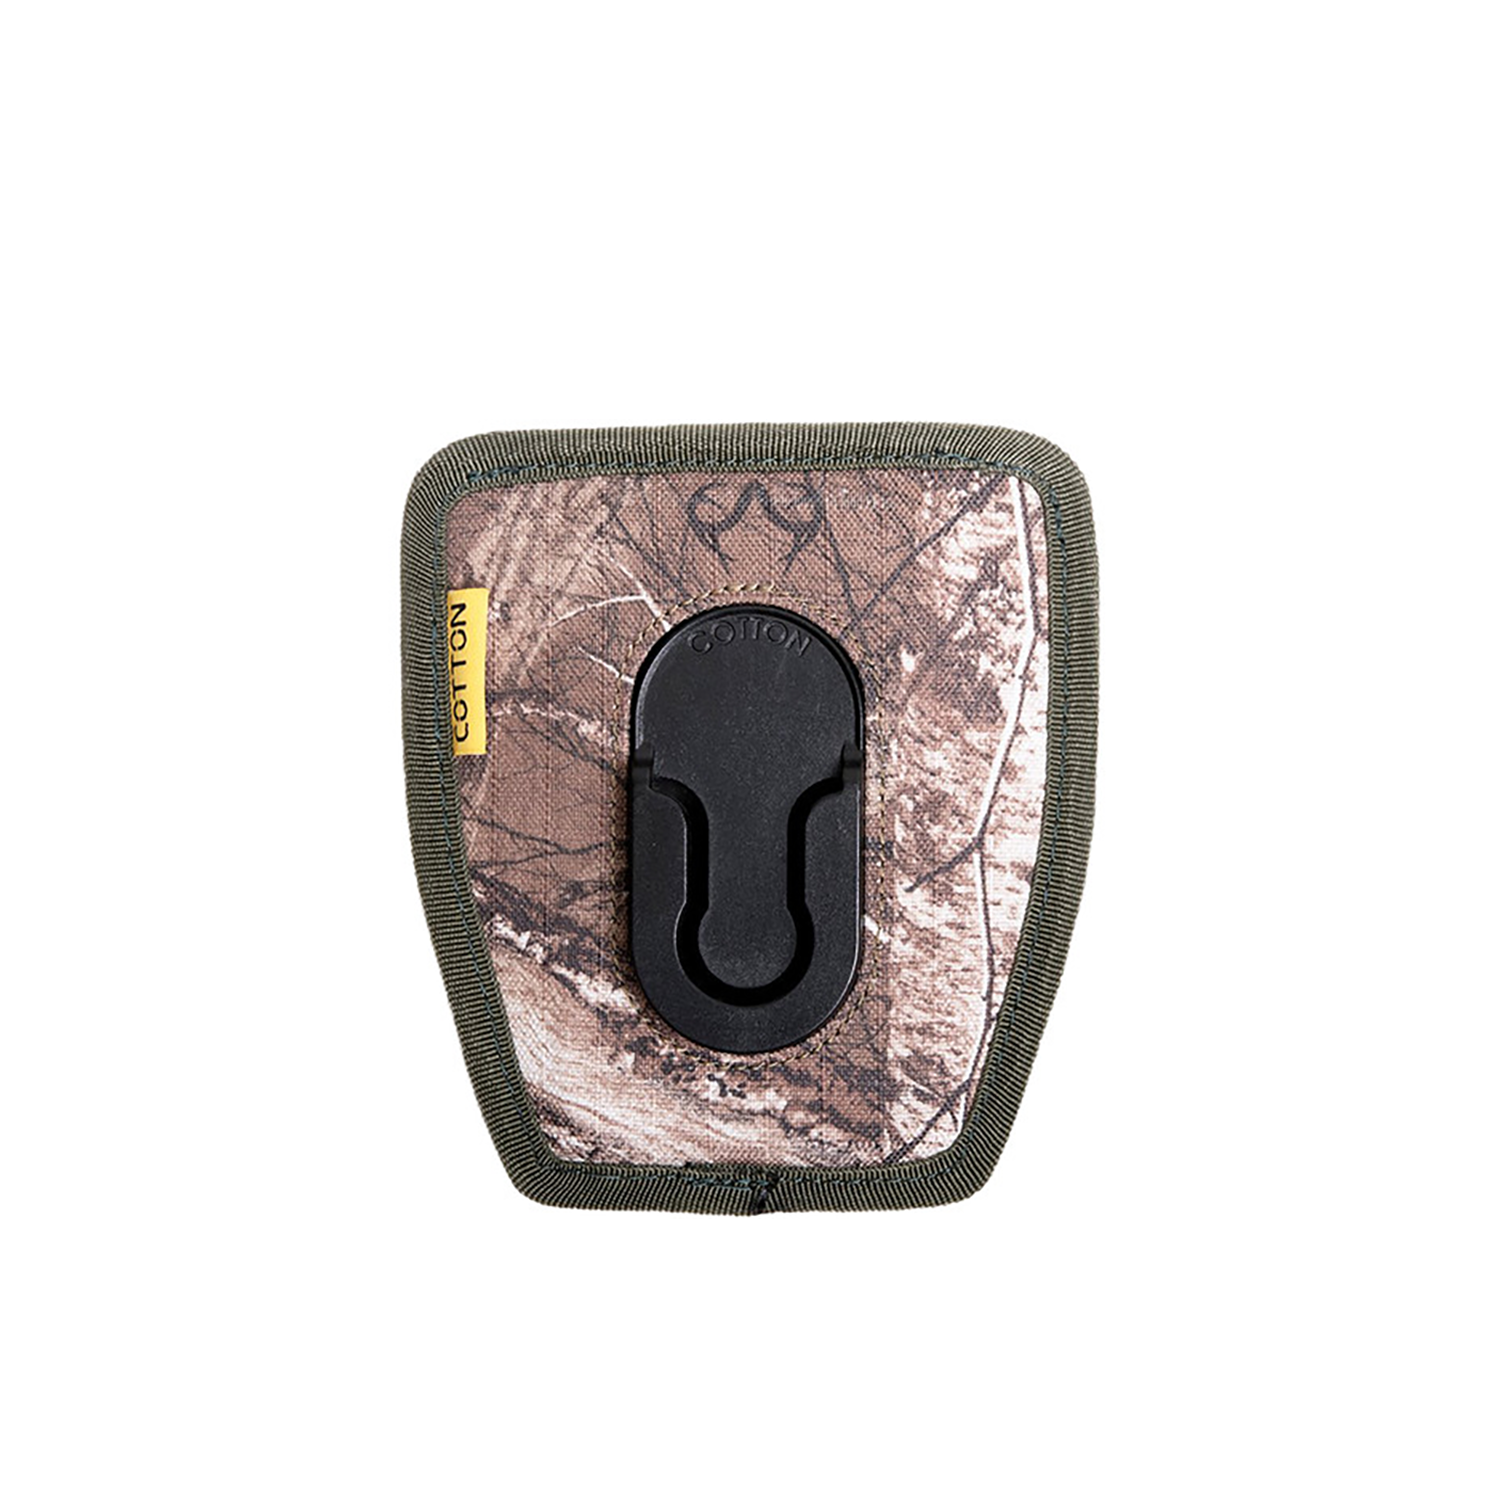 Cotton Carrier CCS G3 Wanderer Side Holster for All Camera Body Styles - Camo